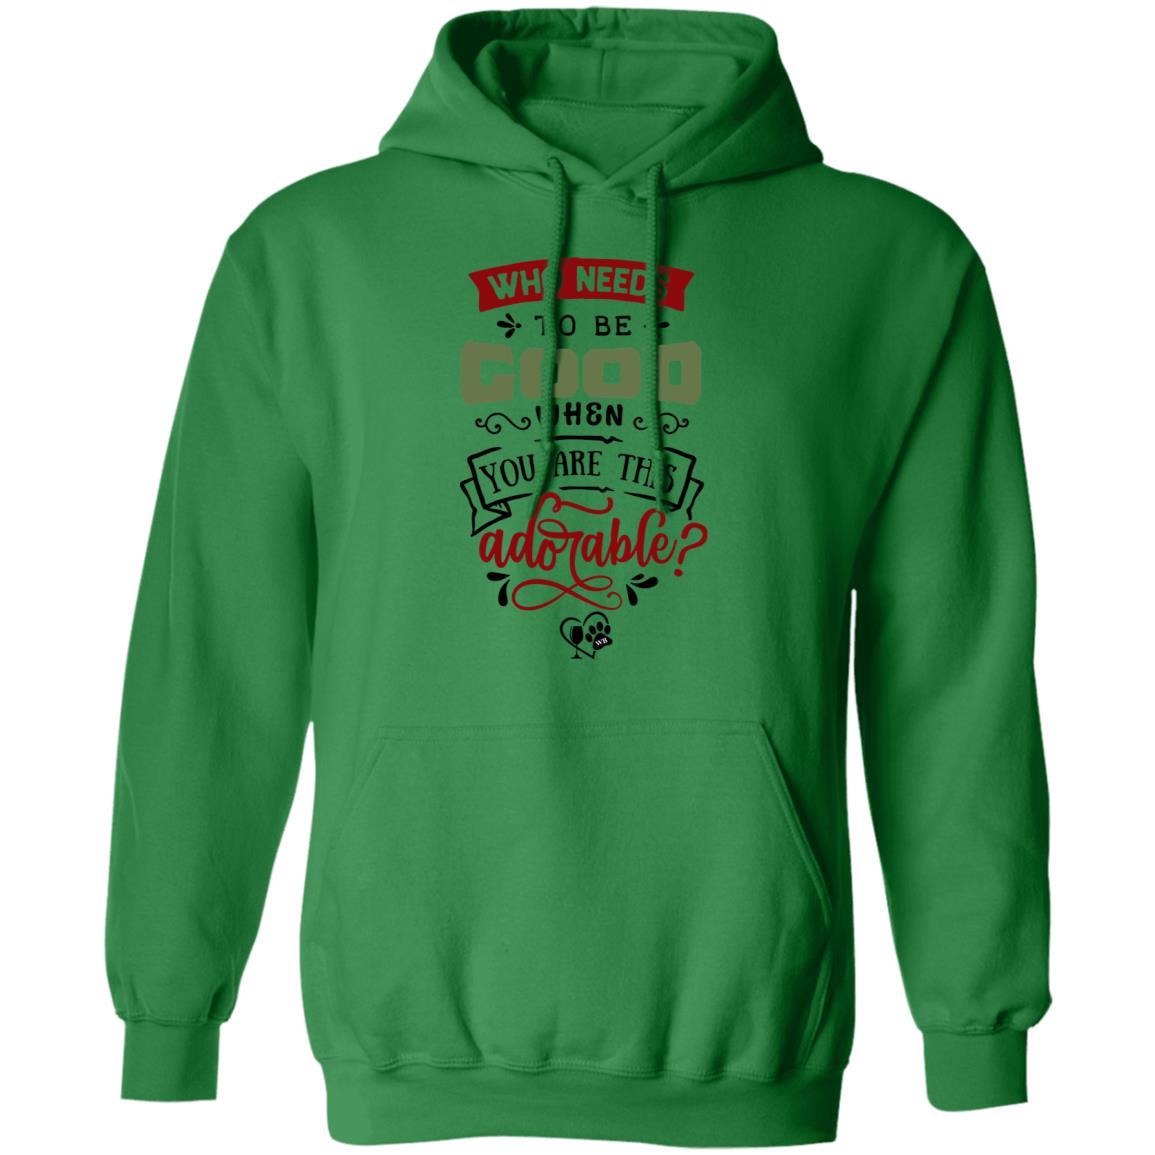 Sweatshirts Irish Green / S WineyBitches.Co "Who Needs To Be Good When You Are This Adorable" Pullover Hoodie 8 oz. WineyBitchesCo